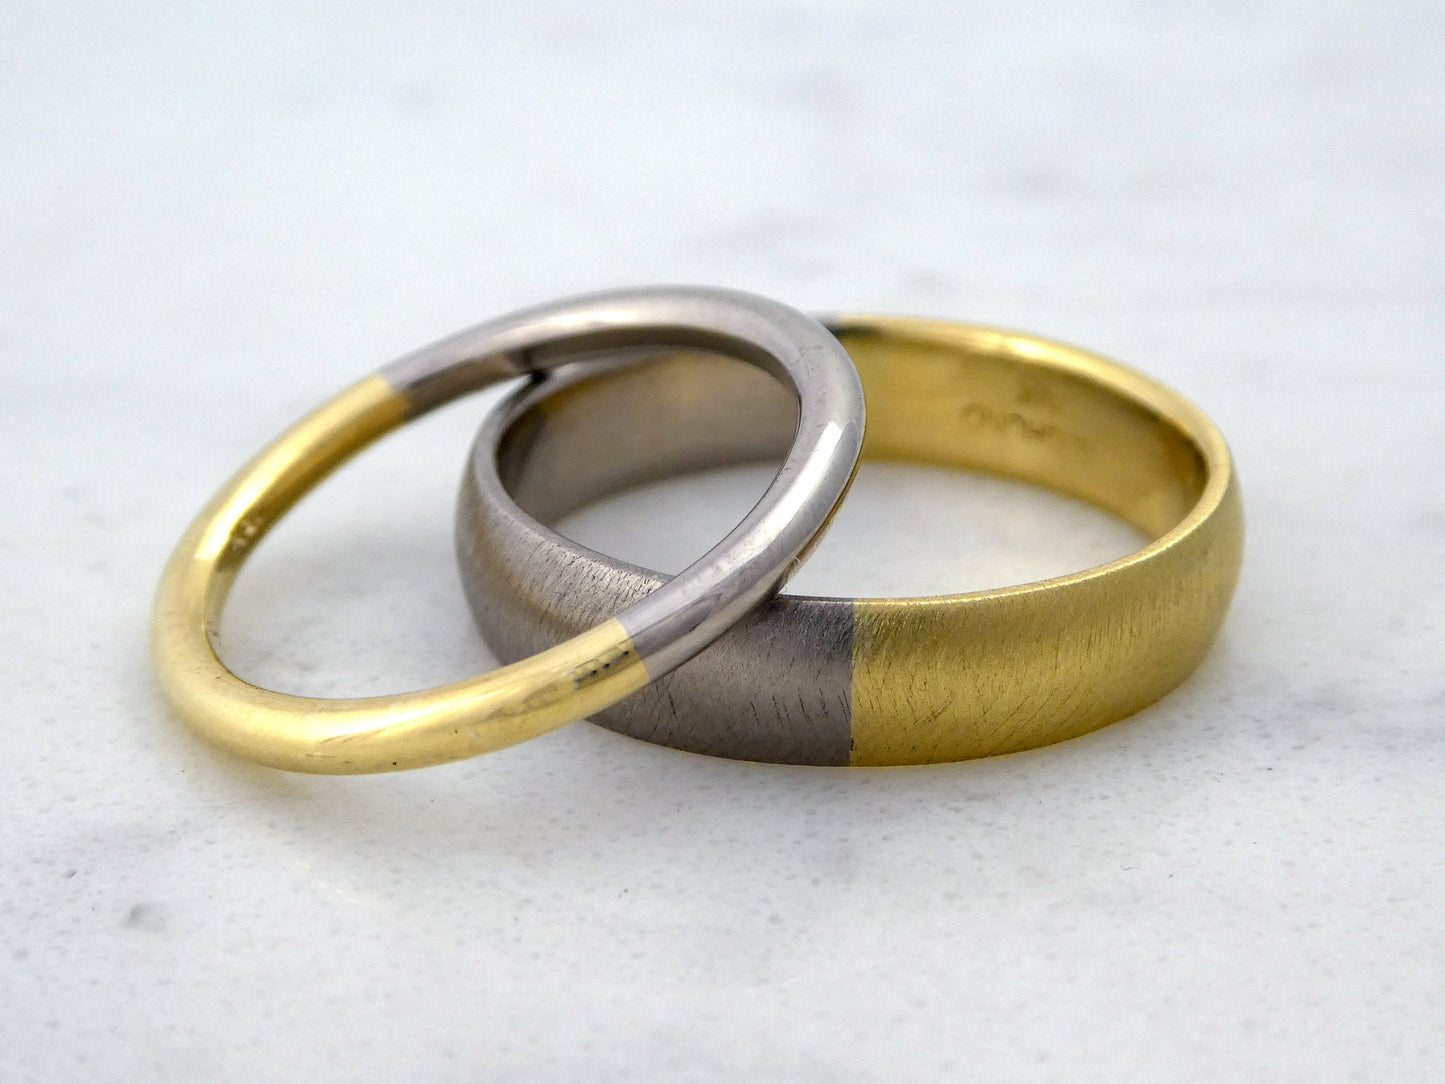 Platinum and 18k Yellow Gold 2mm Round Wedding Ring | 50/50 Partnership in Mixed Precious Metals